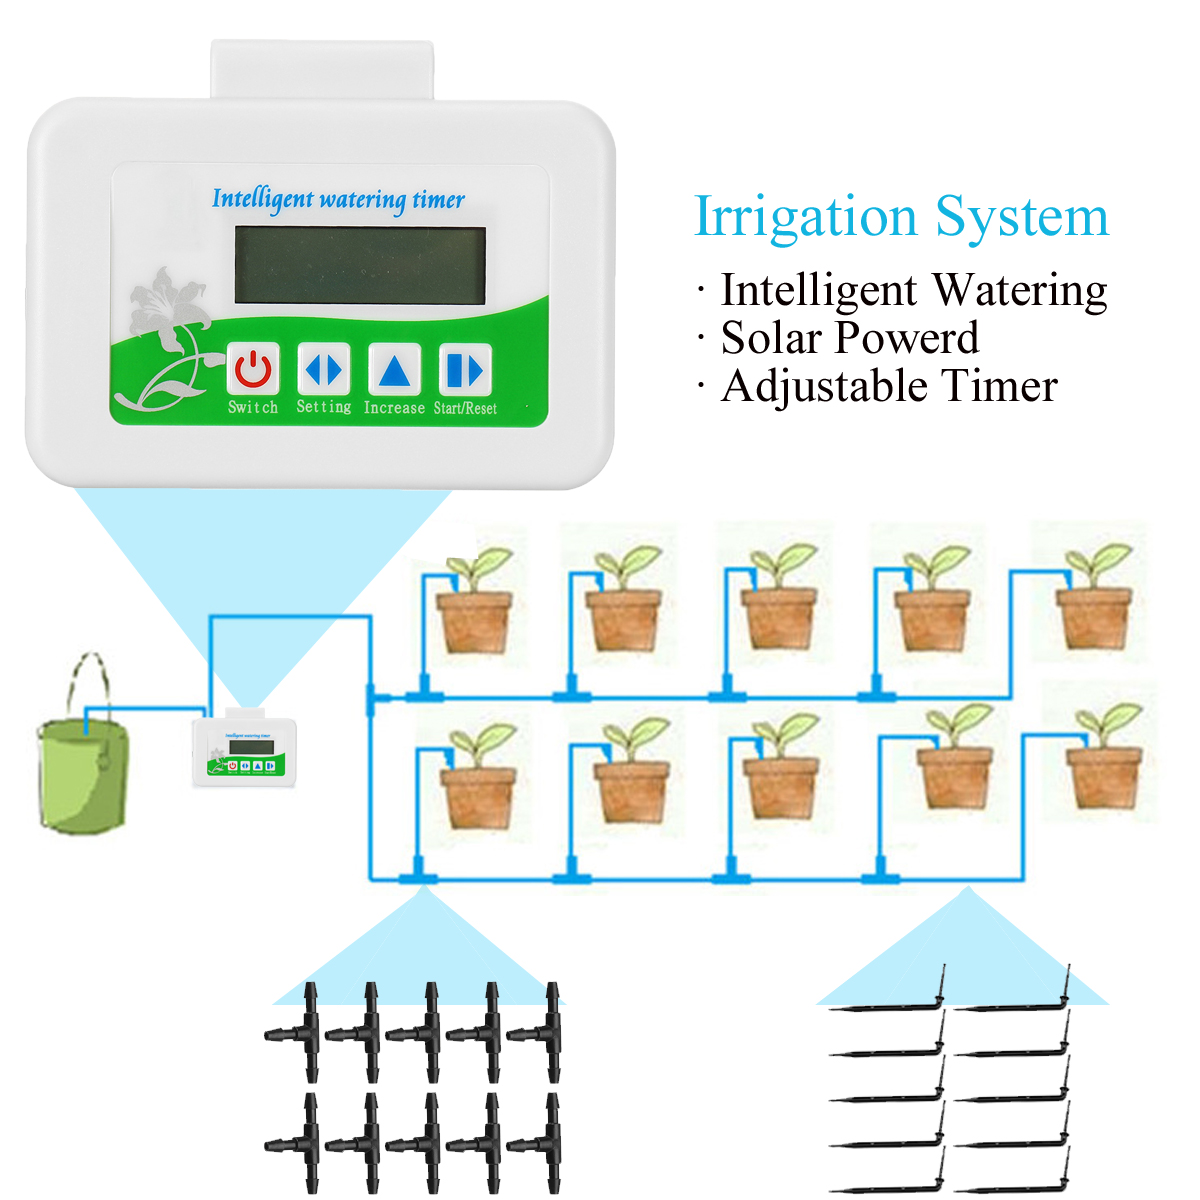 Intelligent-Watering-Timer-Automatic-Solar-Water-Controlle-Irrigation-System-Kit-1711287-3